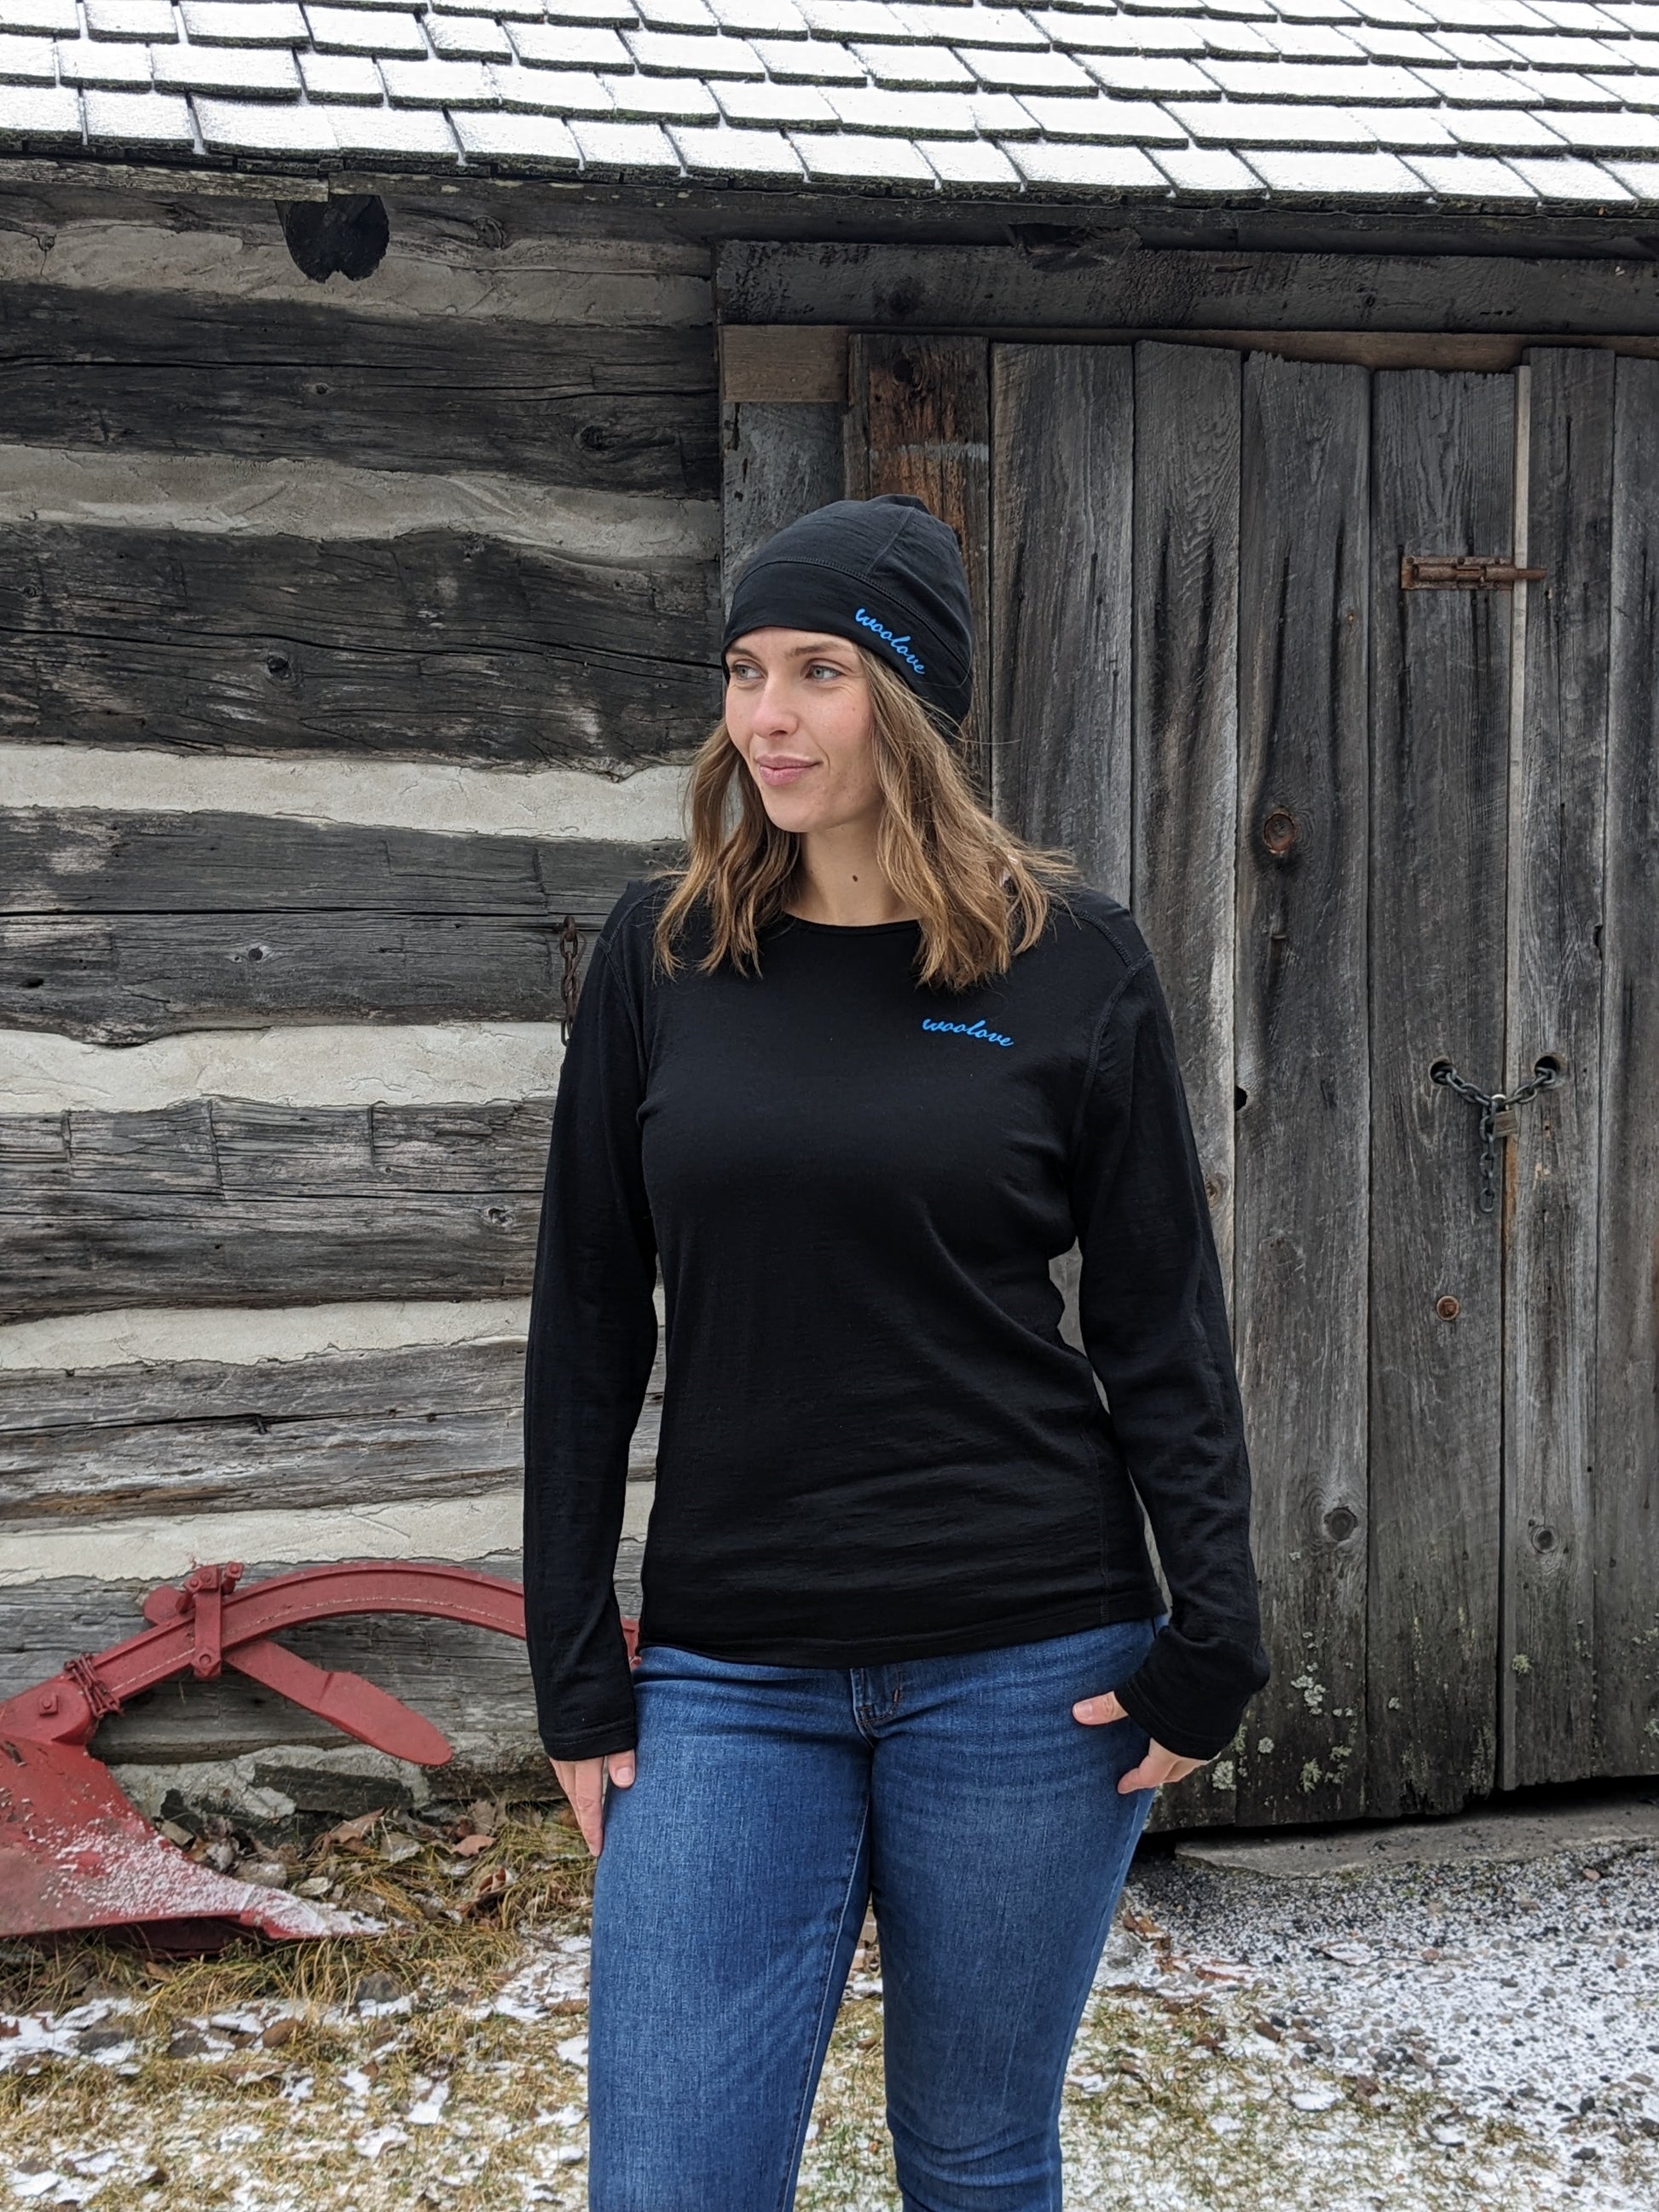 our model is wearing: unisex one size fits most 100% Merino Wool Beanie Hat by Wool Love. This Merino Wool Beanie hat is perfect for wearing under your fat biking or hockey or snowboarding helmet. A great cold weather 'go to' to keep in your pocket or purse for when the cold creeps up on you!